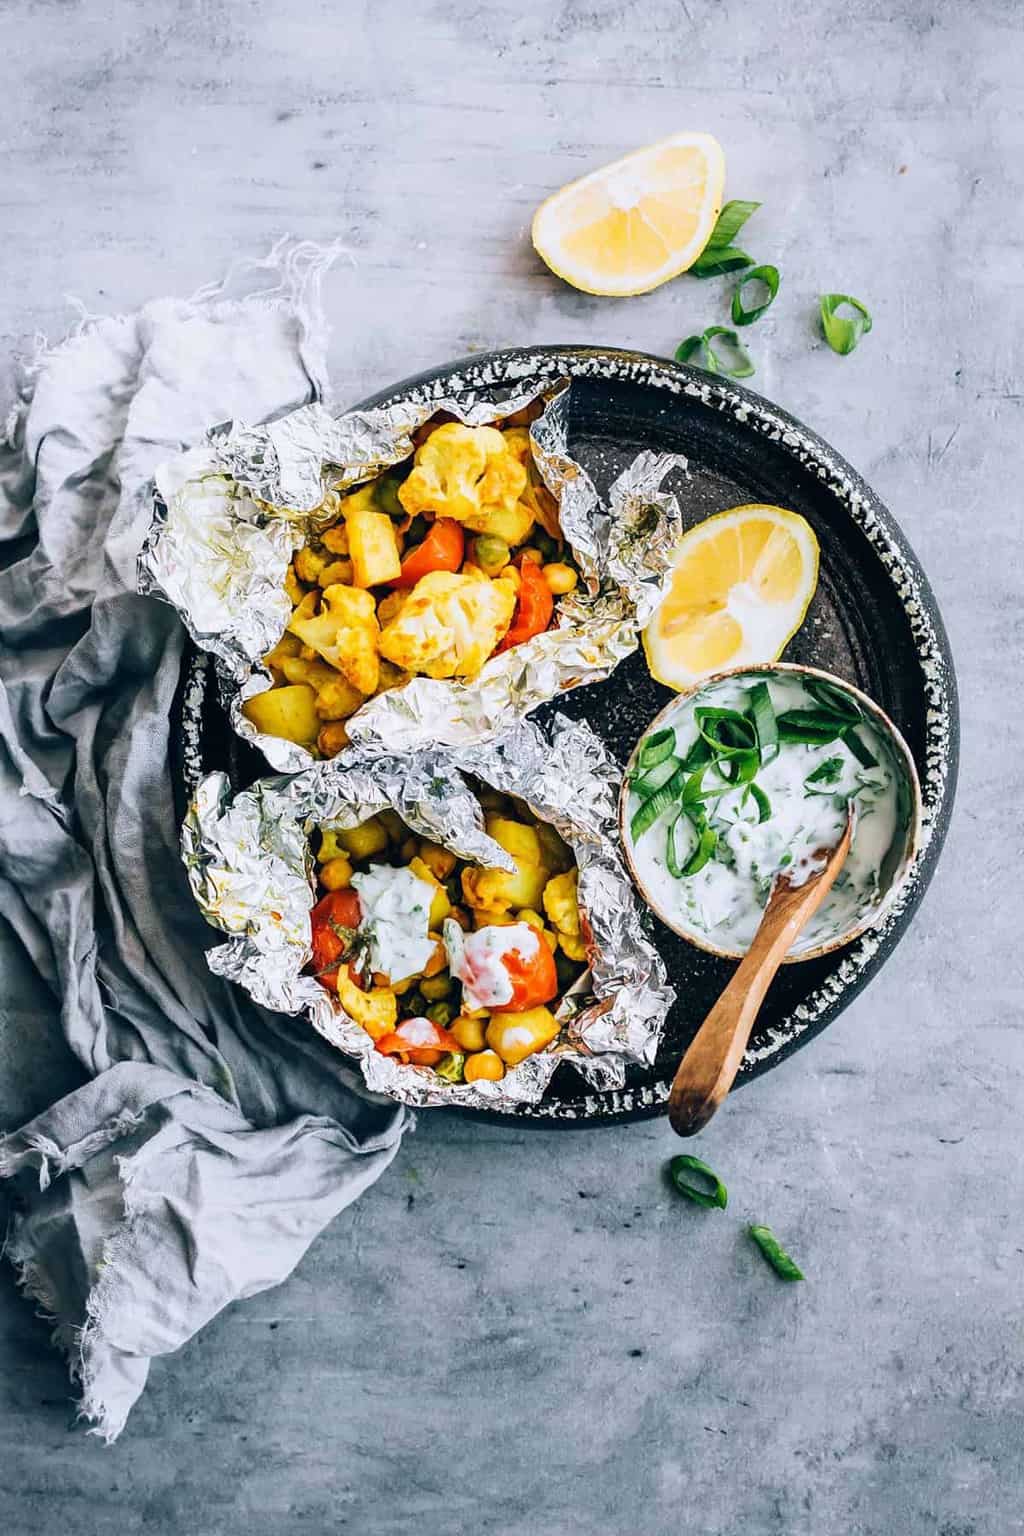 Make These Curry Cauliflower Grill Packets for Your Next Cookout